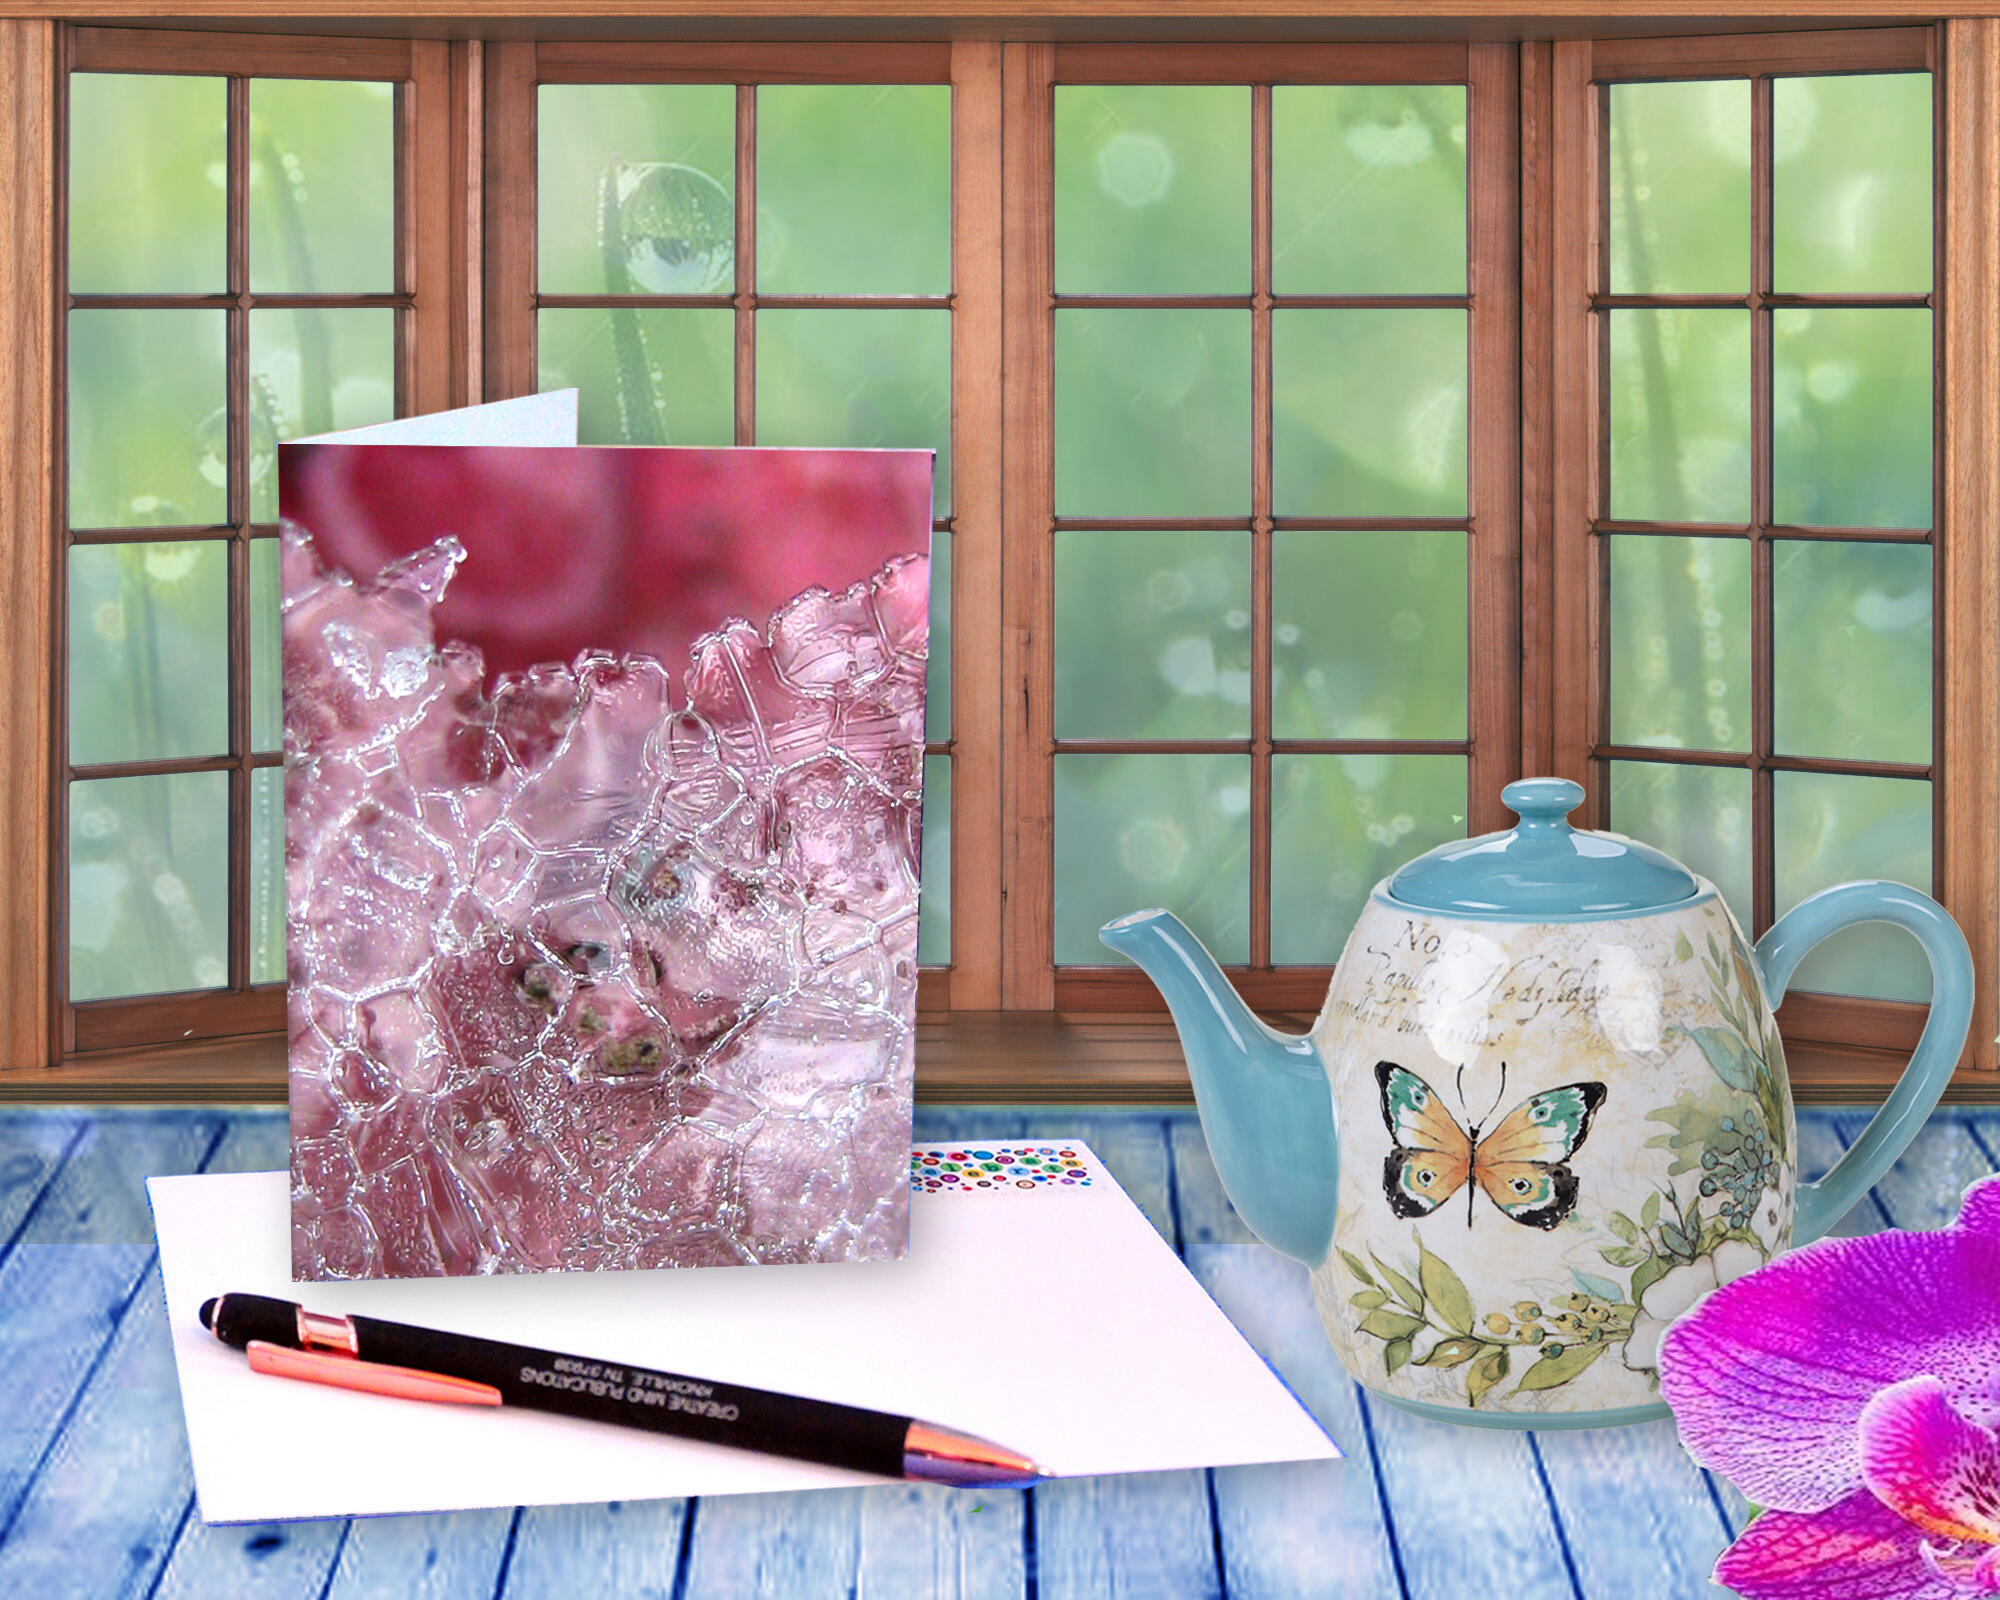 Rose Ice - Greeting Card by The Poetry of Nature